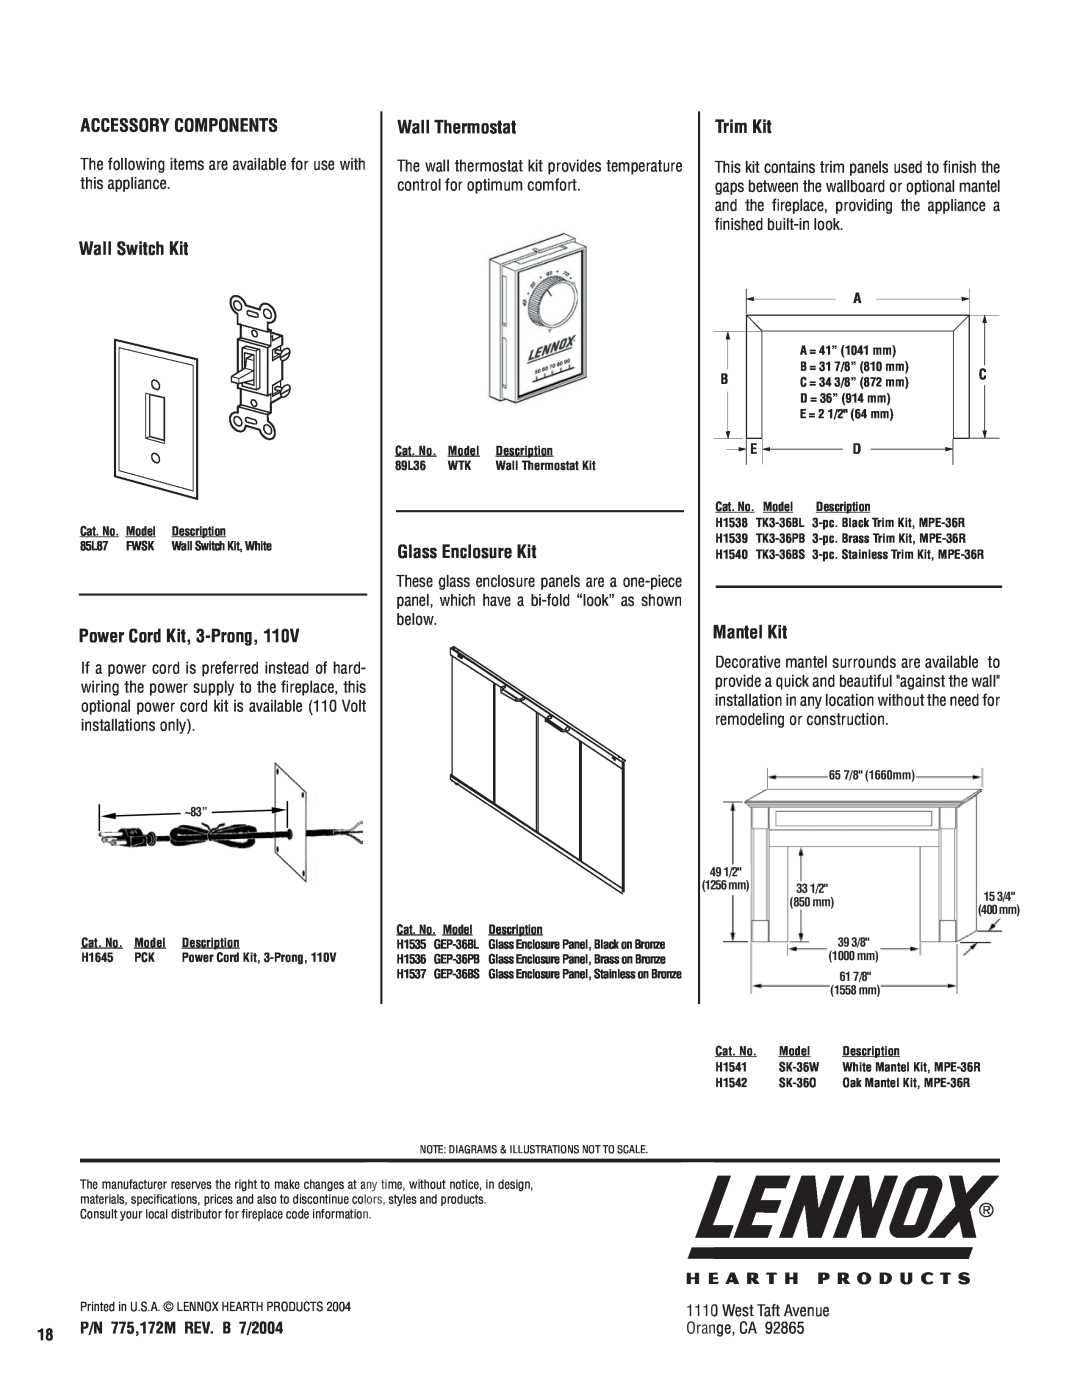 Lennox Hearth MPE-36R Accessory Components, Wall Switch Kit, Power Cord Kit, 3-Prong,110V, Wall Thermostat, Trim Kit 